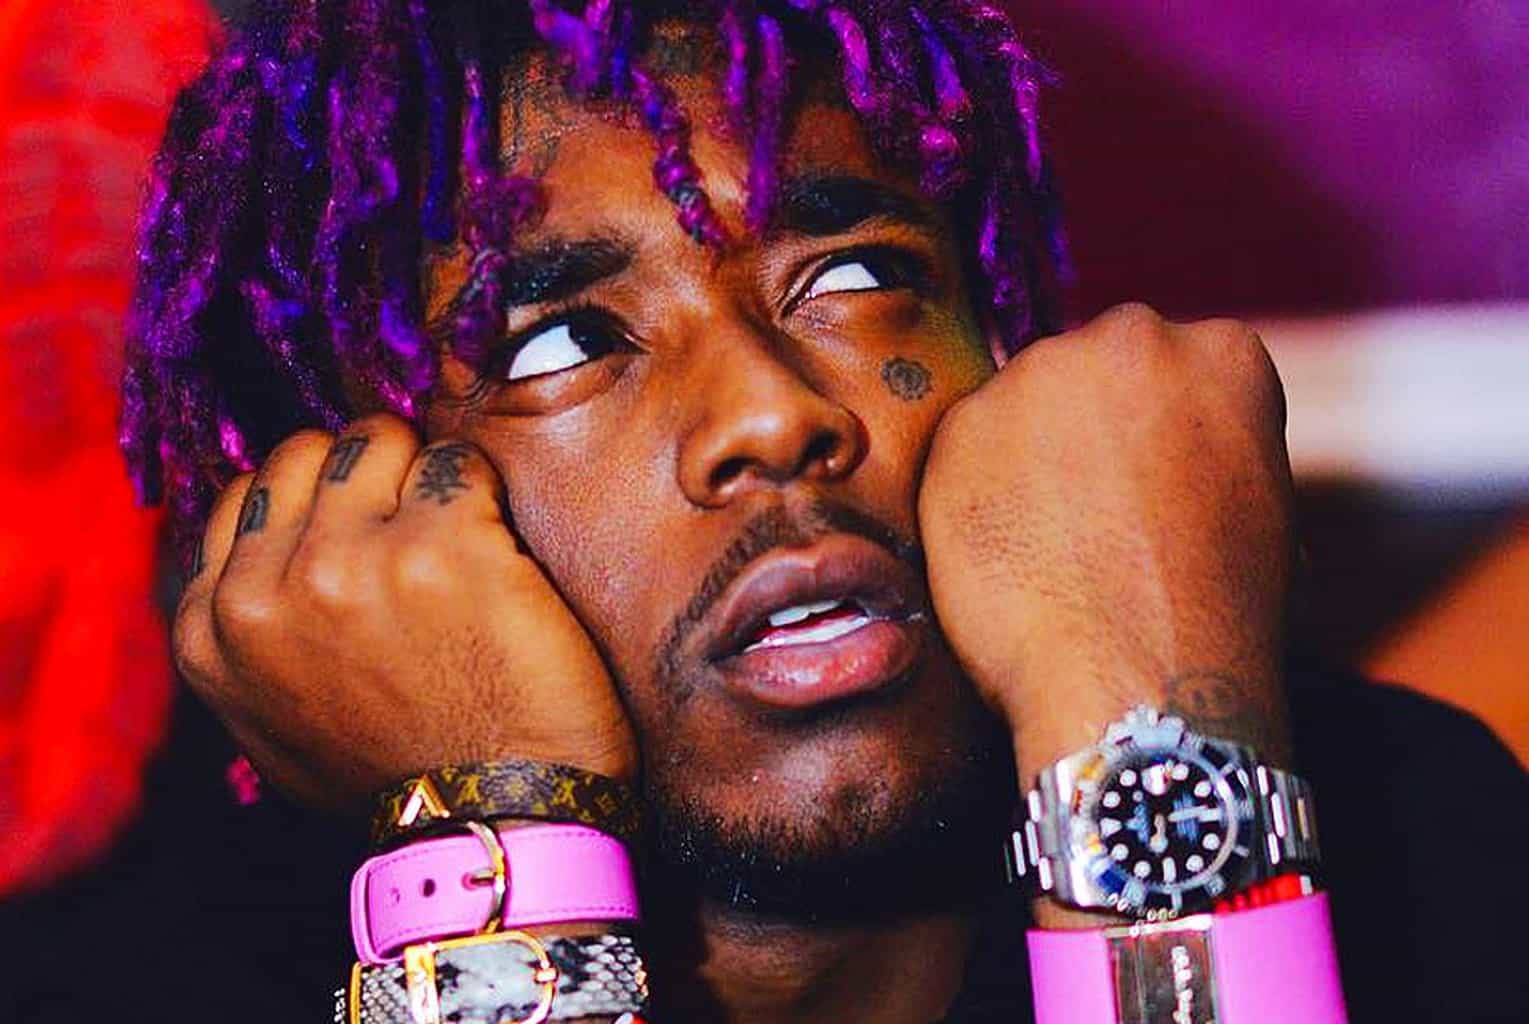 The Appeal Of Lil Uzi Vert & How It Made Him Famous